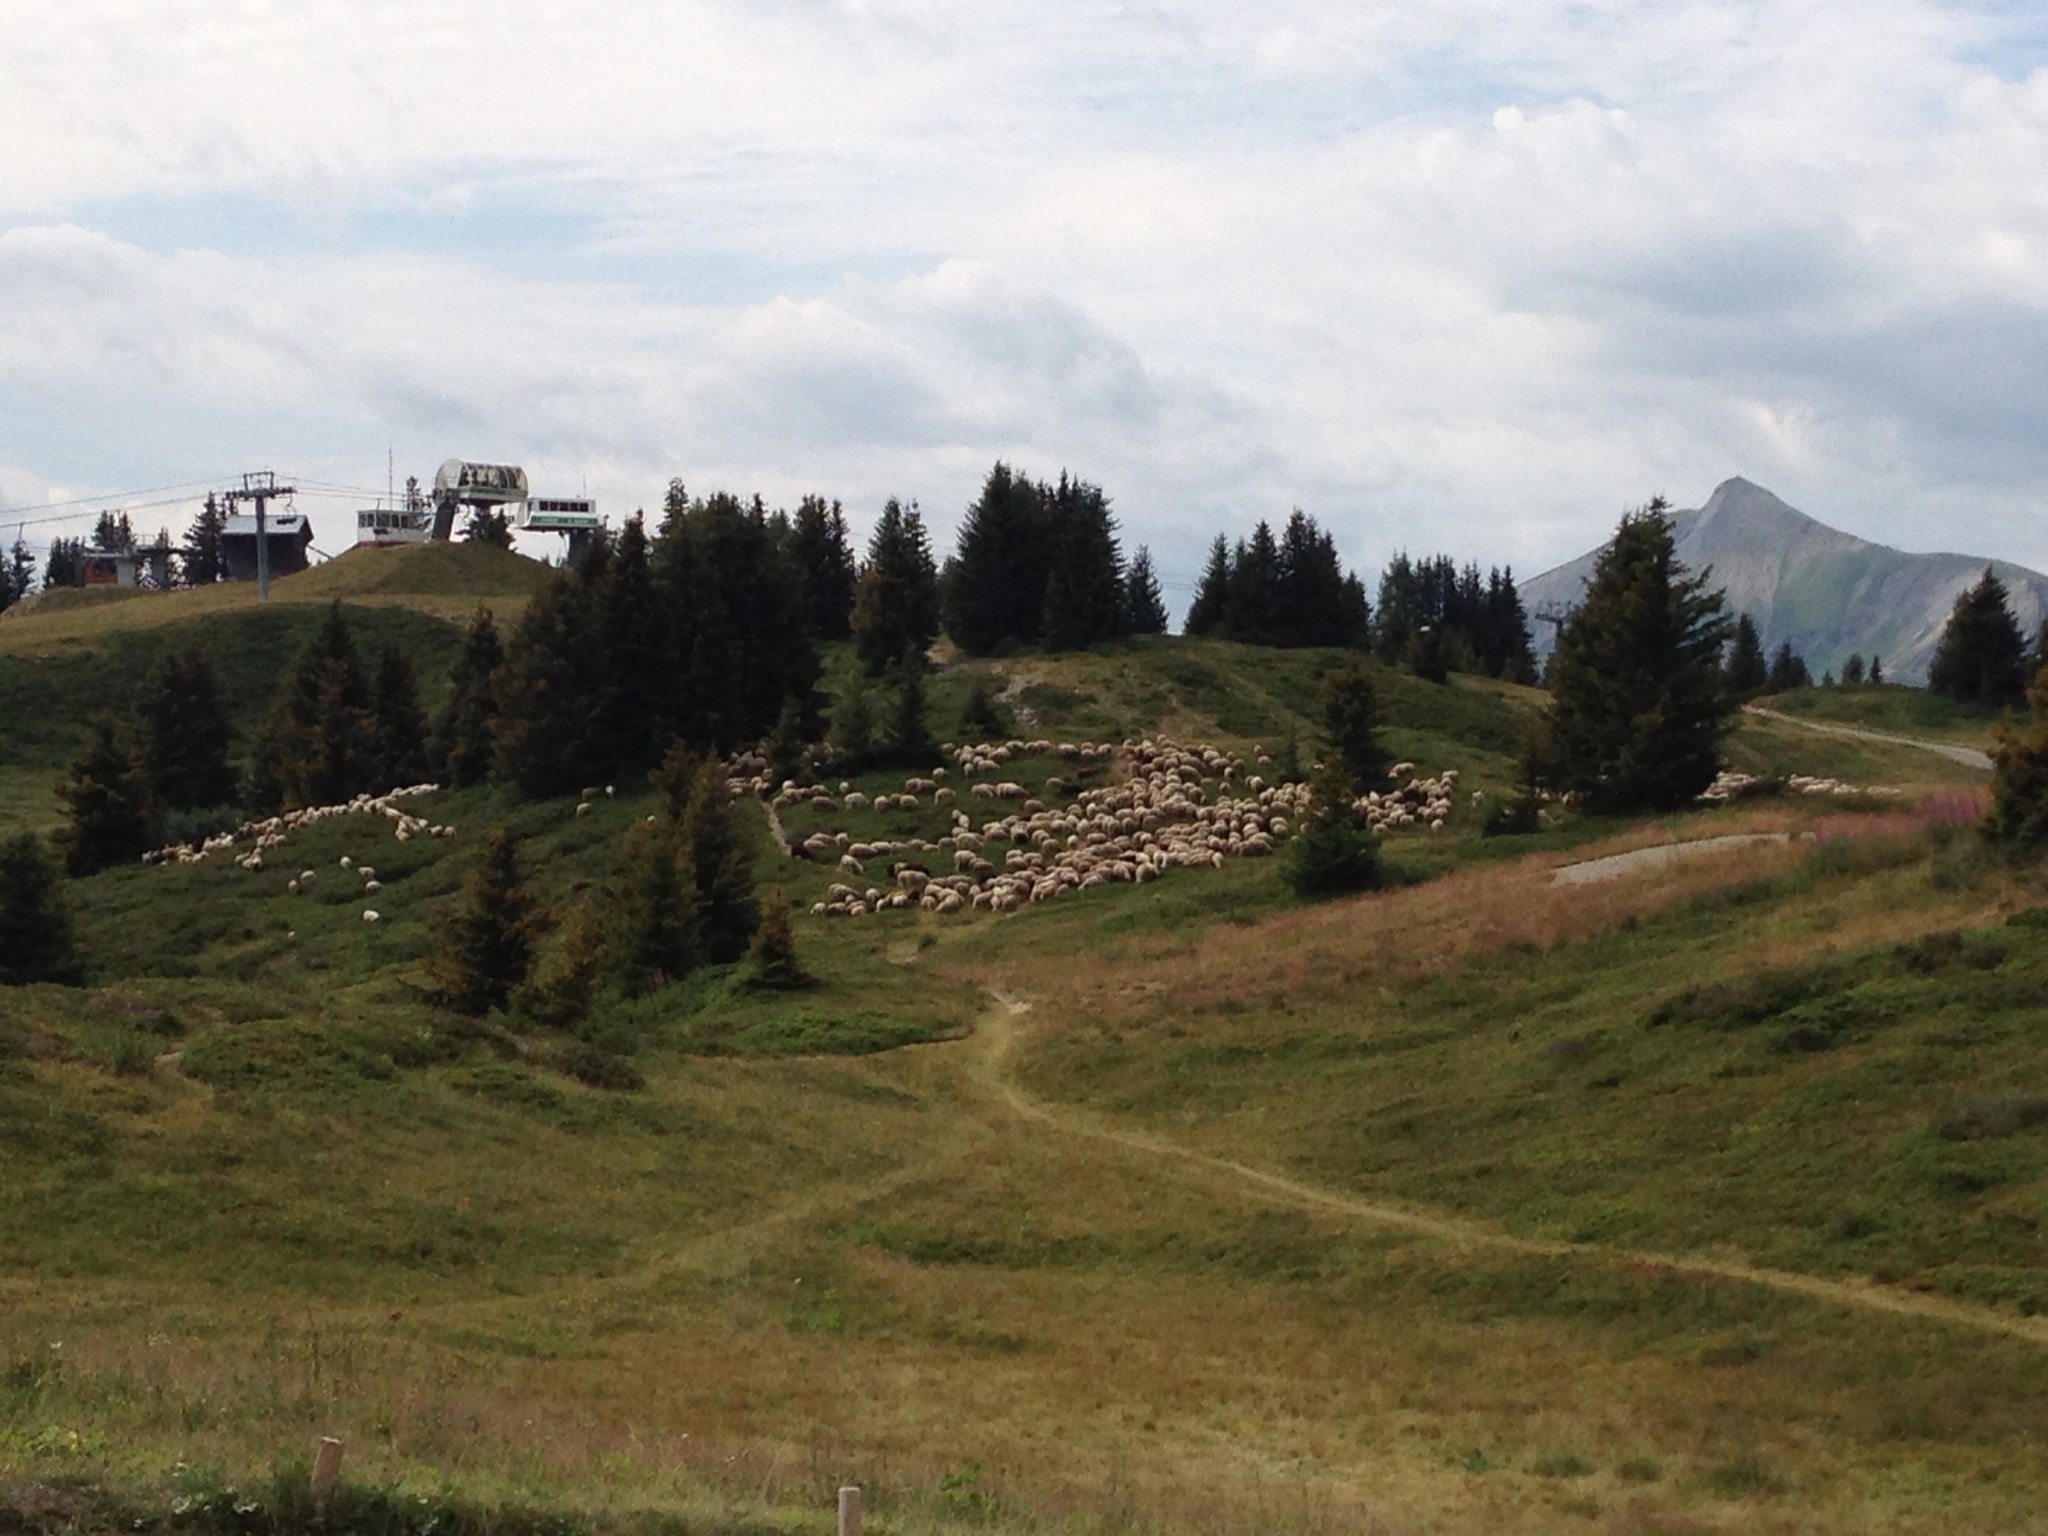 Ski lifts and sheep in the high pastures above Les Houches, France